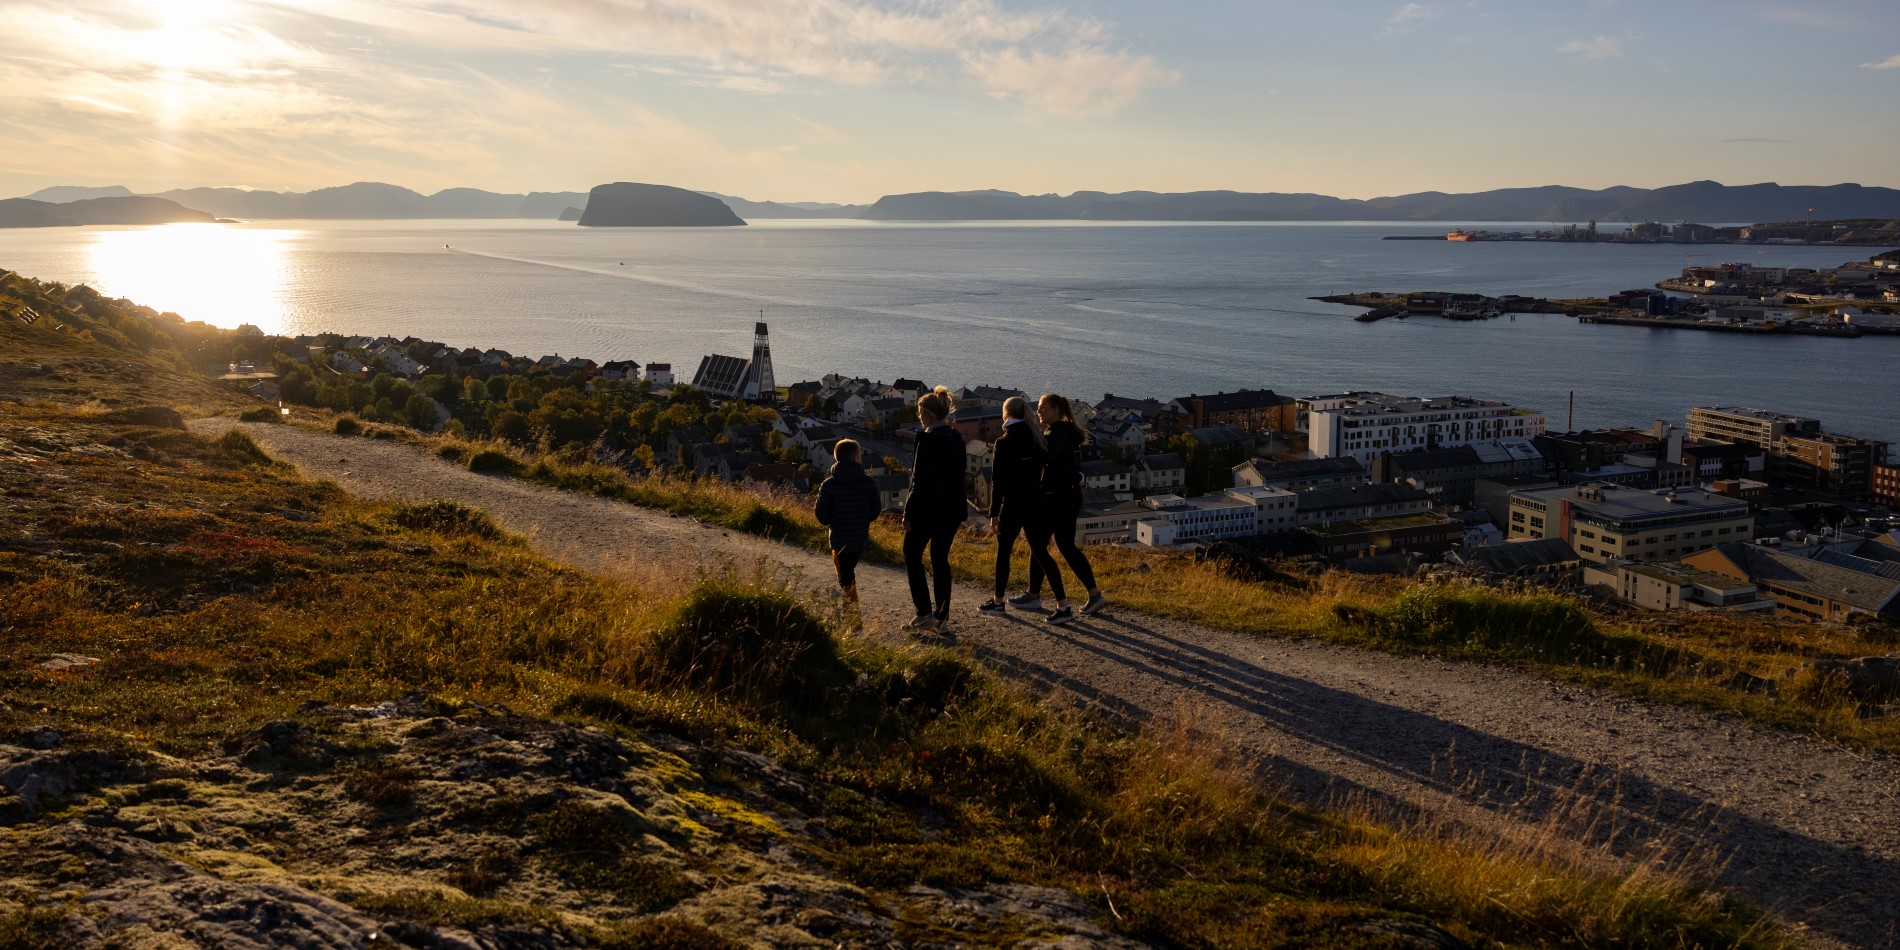 It’s sunset and four people are walking on the hillside. Below them, they can see the town of Hammerfest, Norway. 